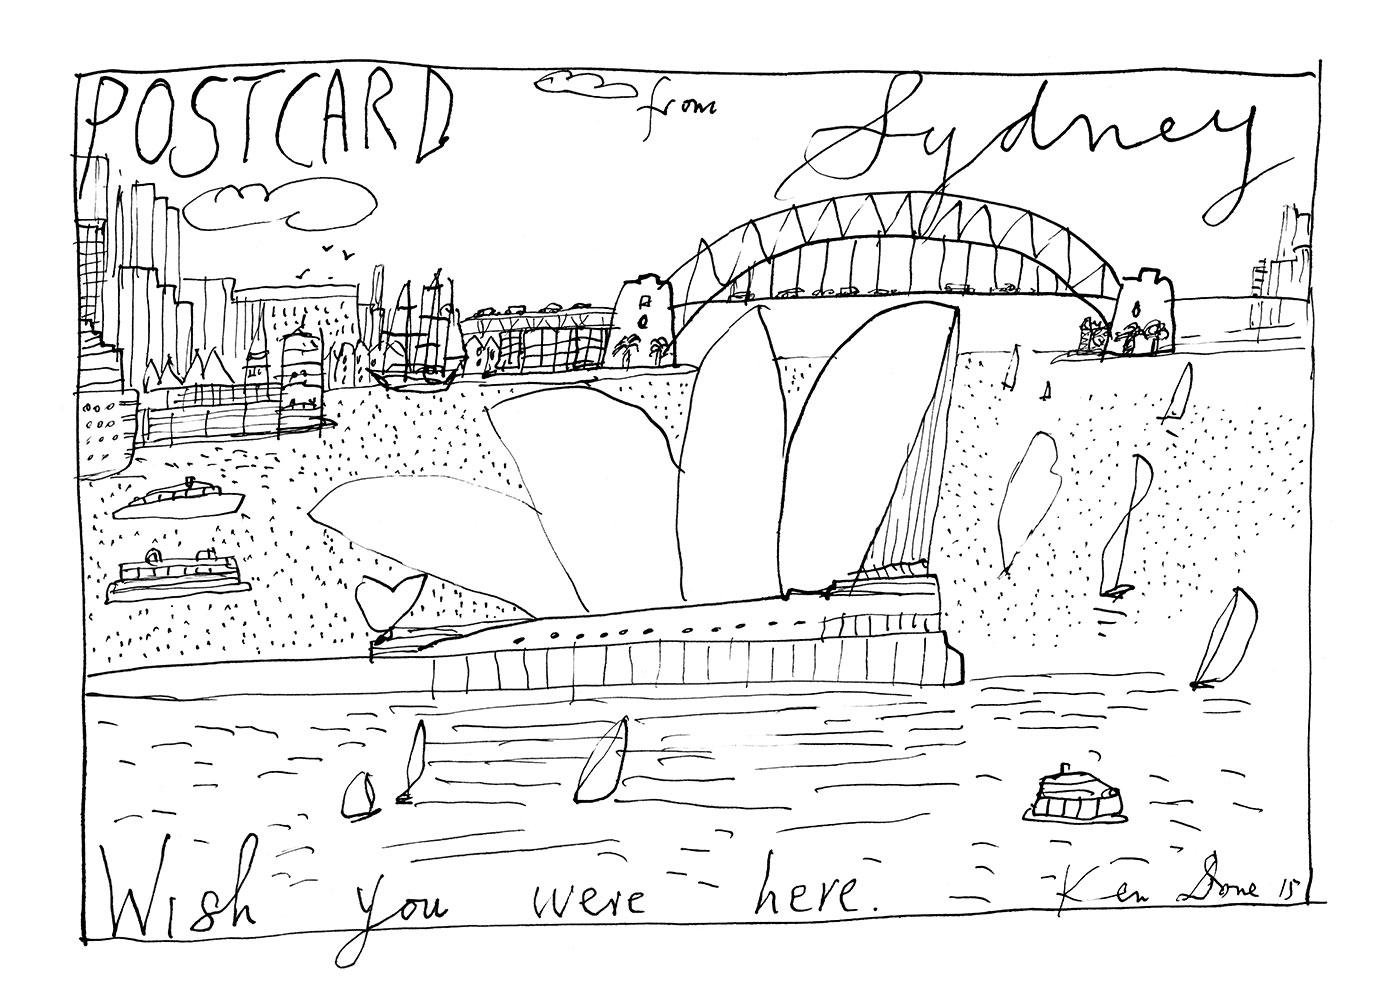 Postcard from Sydney, wish you were here